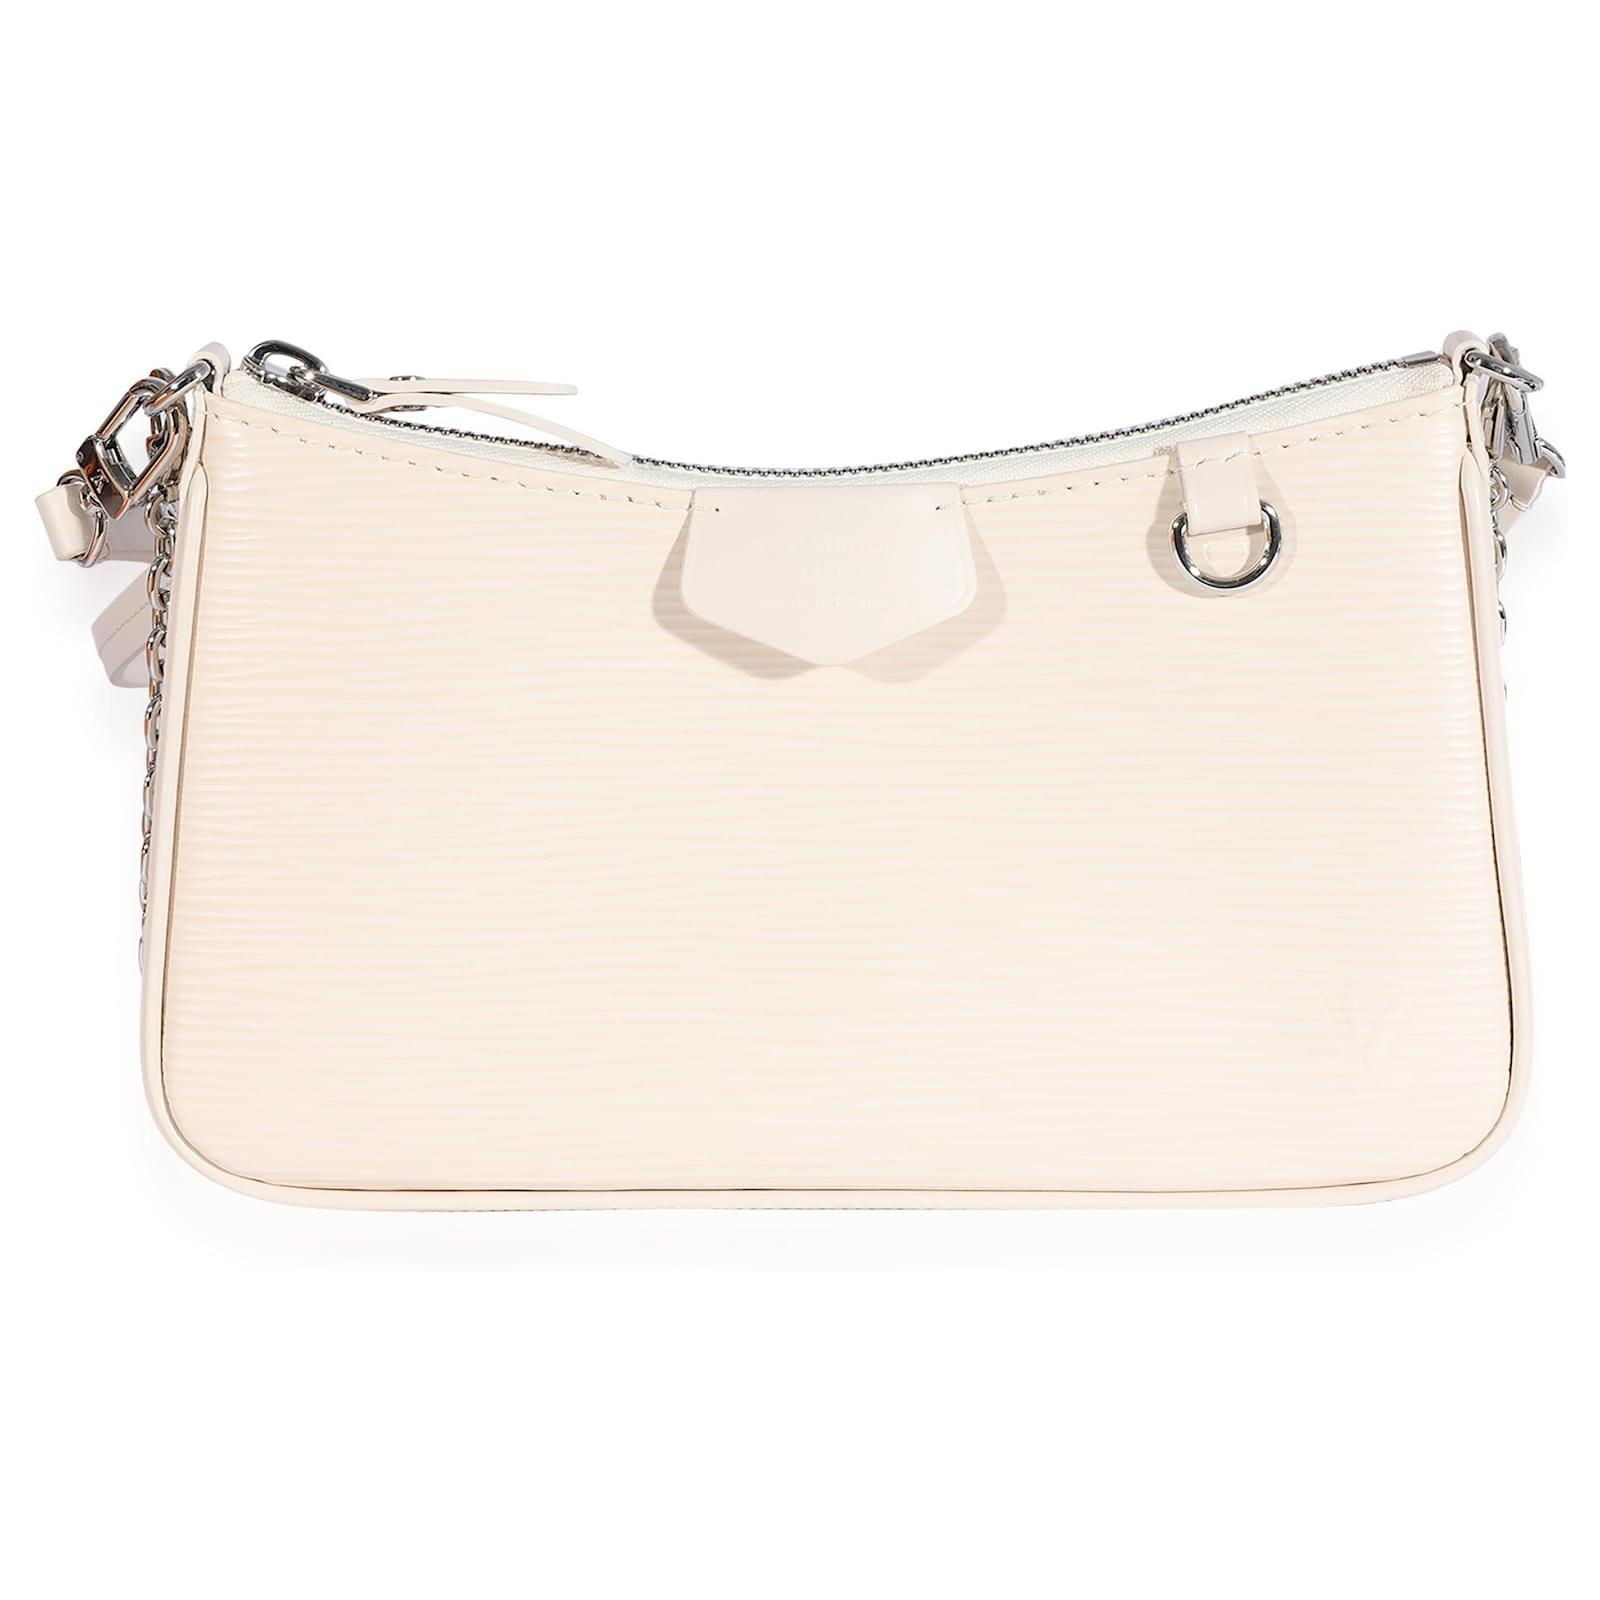 Easy pouch on strap leather handbag Louis Vuitton White in Leather